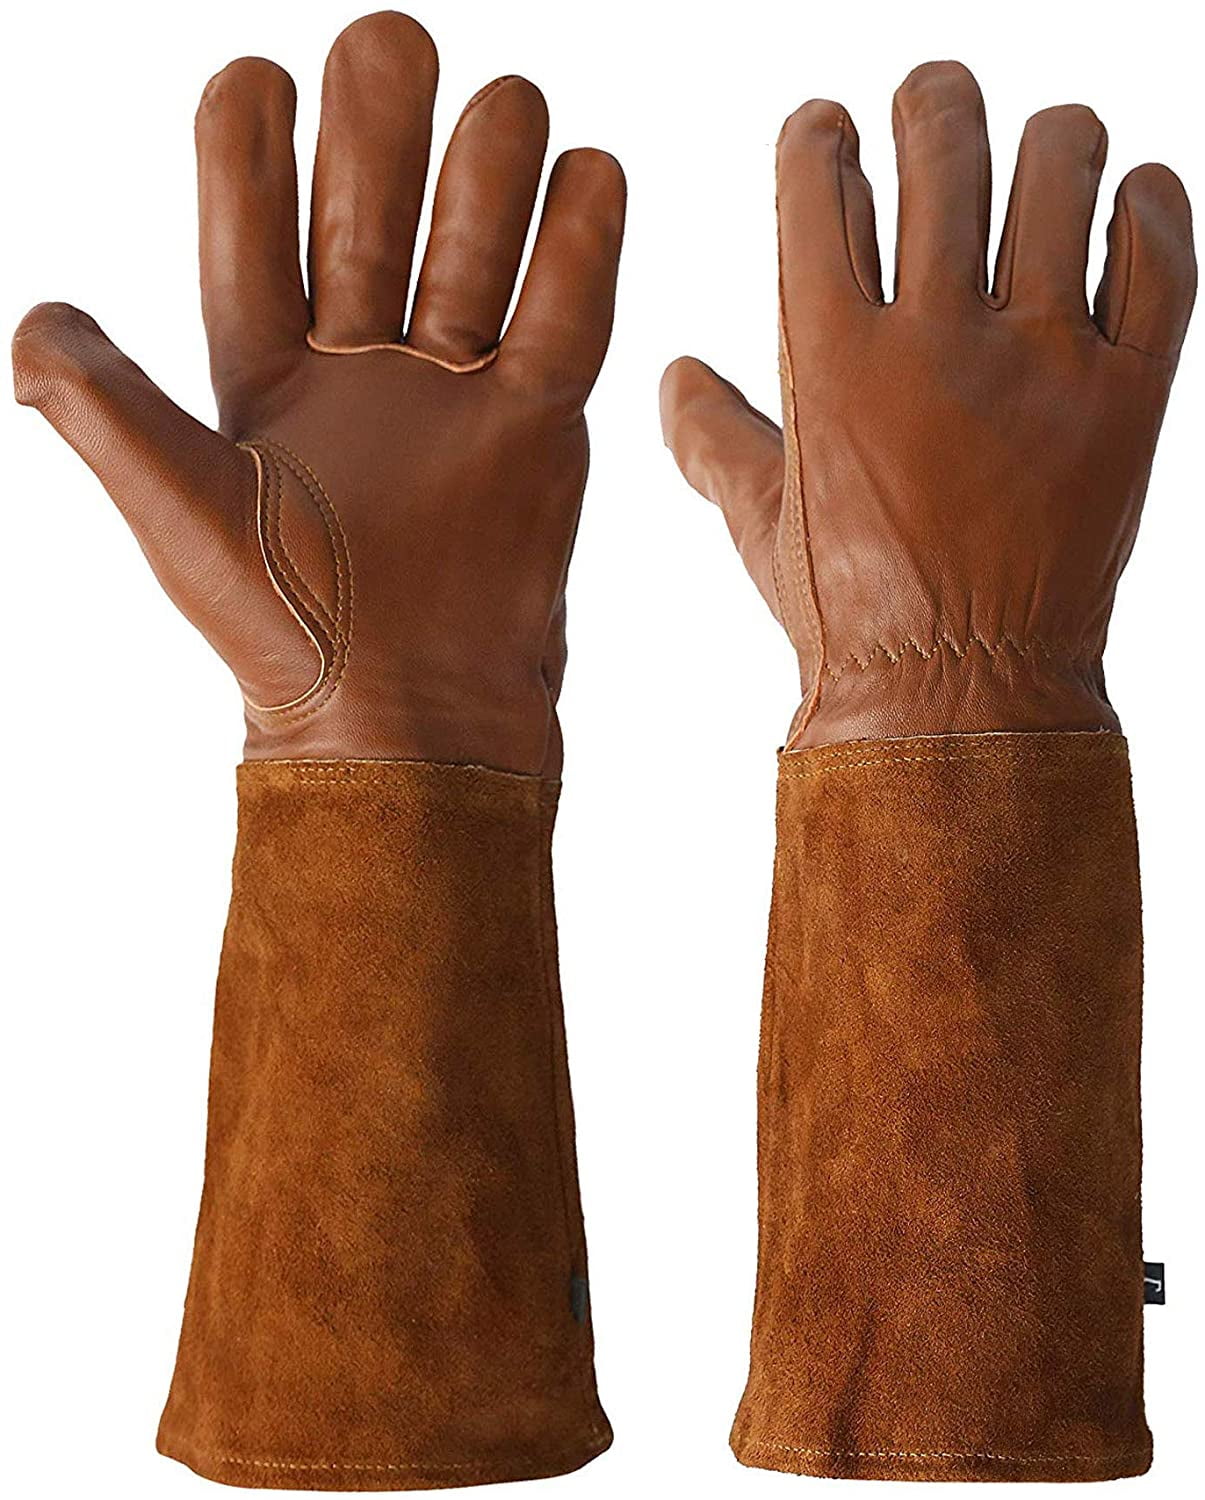 Rose Pruning Gloves With Extra Long Cowhide Sleeves Breathable Goatskin Leather 